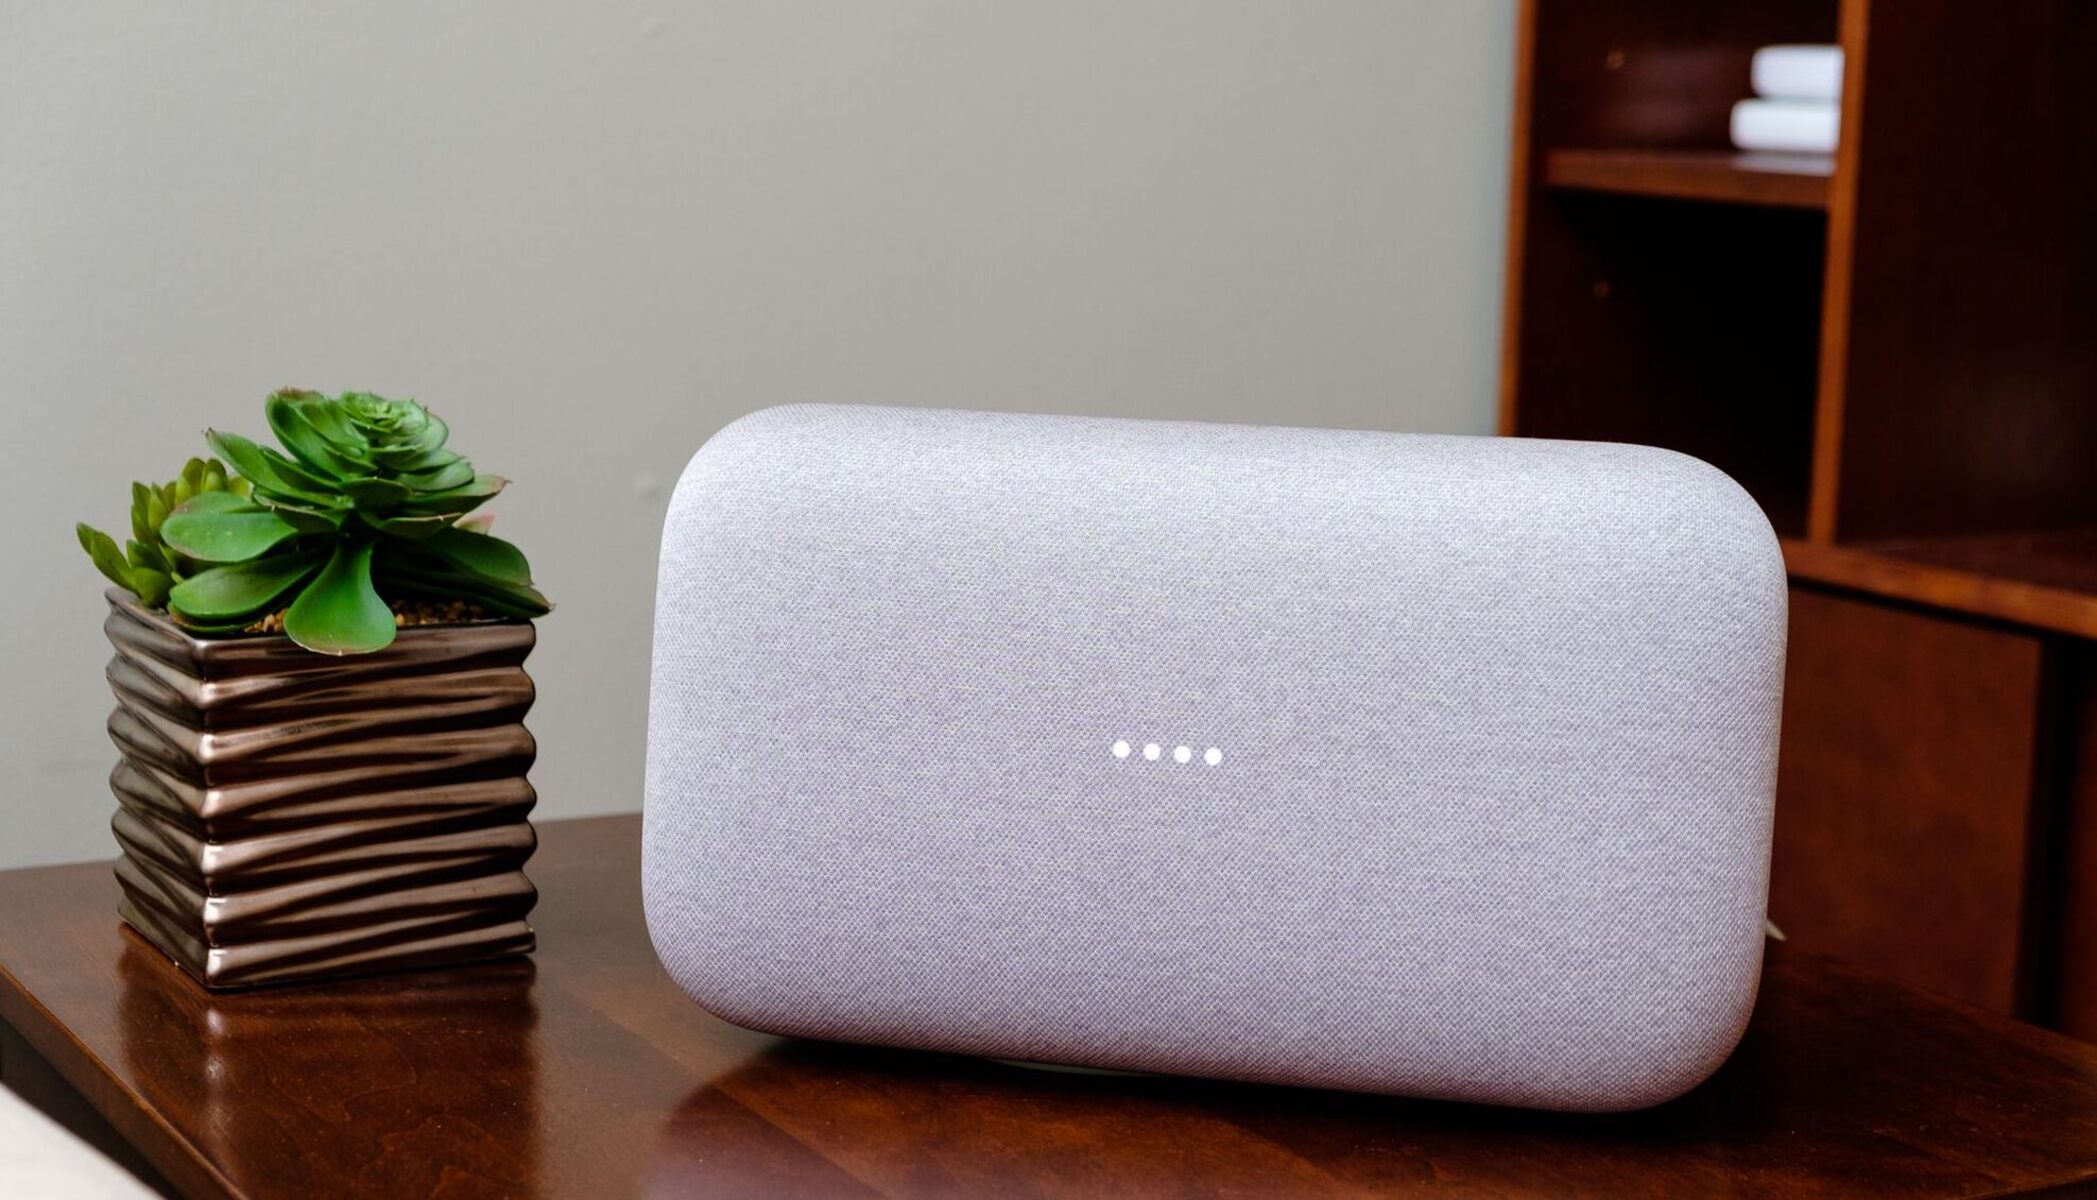 How Is The Music Quality On Google Home Max Smart Speaker